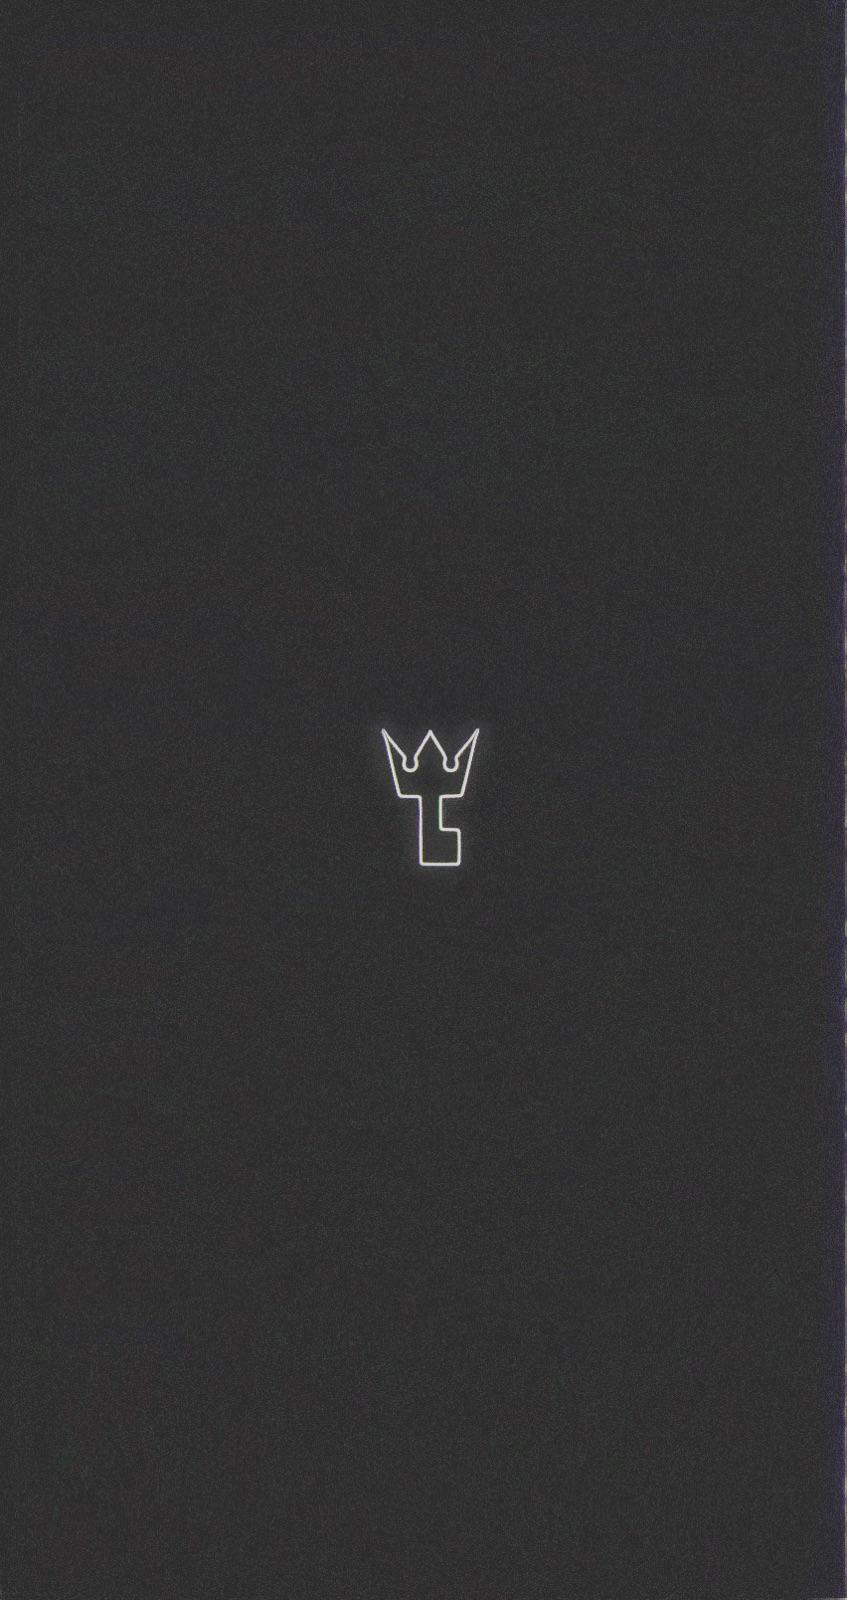 Media made a minimalistic Kingdom Hearts iPhone wallpaper if you're interested